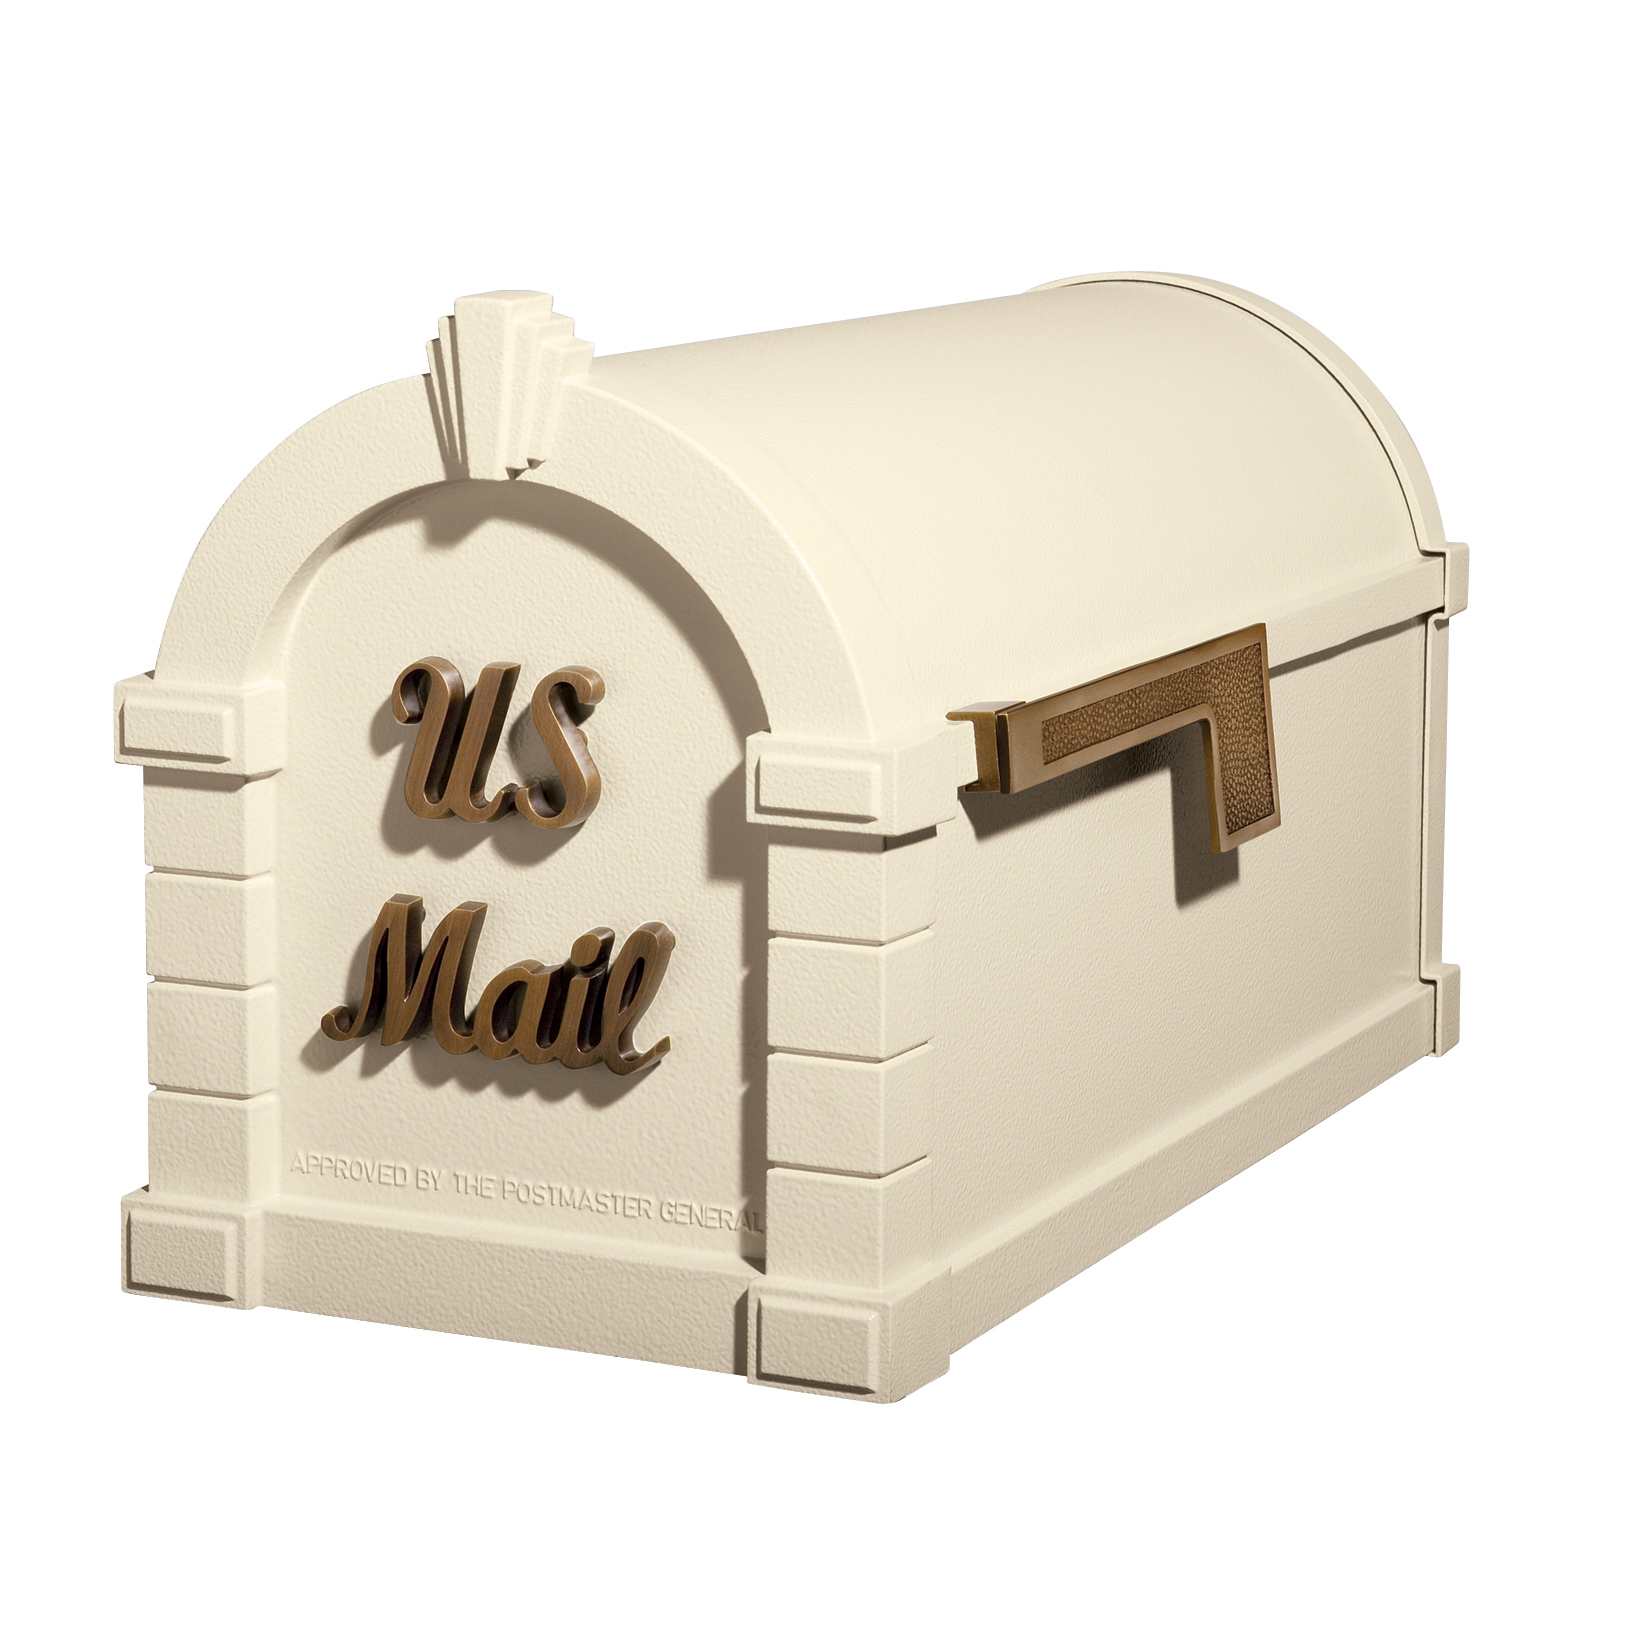 Gaines Signature Keystone Mailboxes - Almond with Antique Bronze